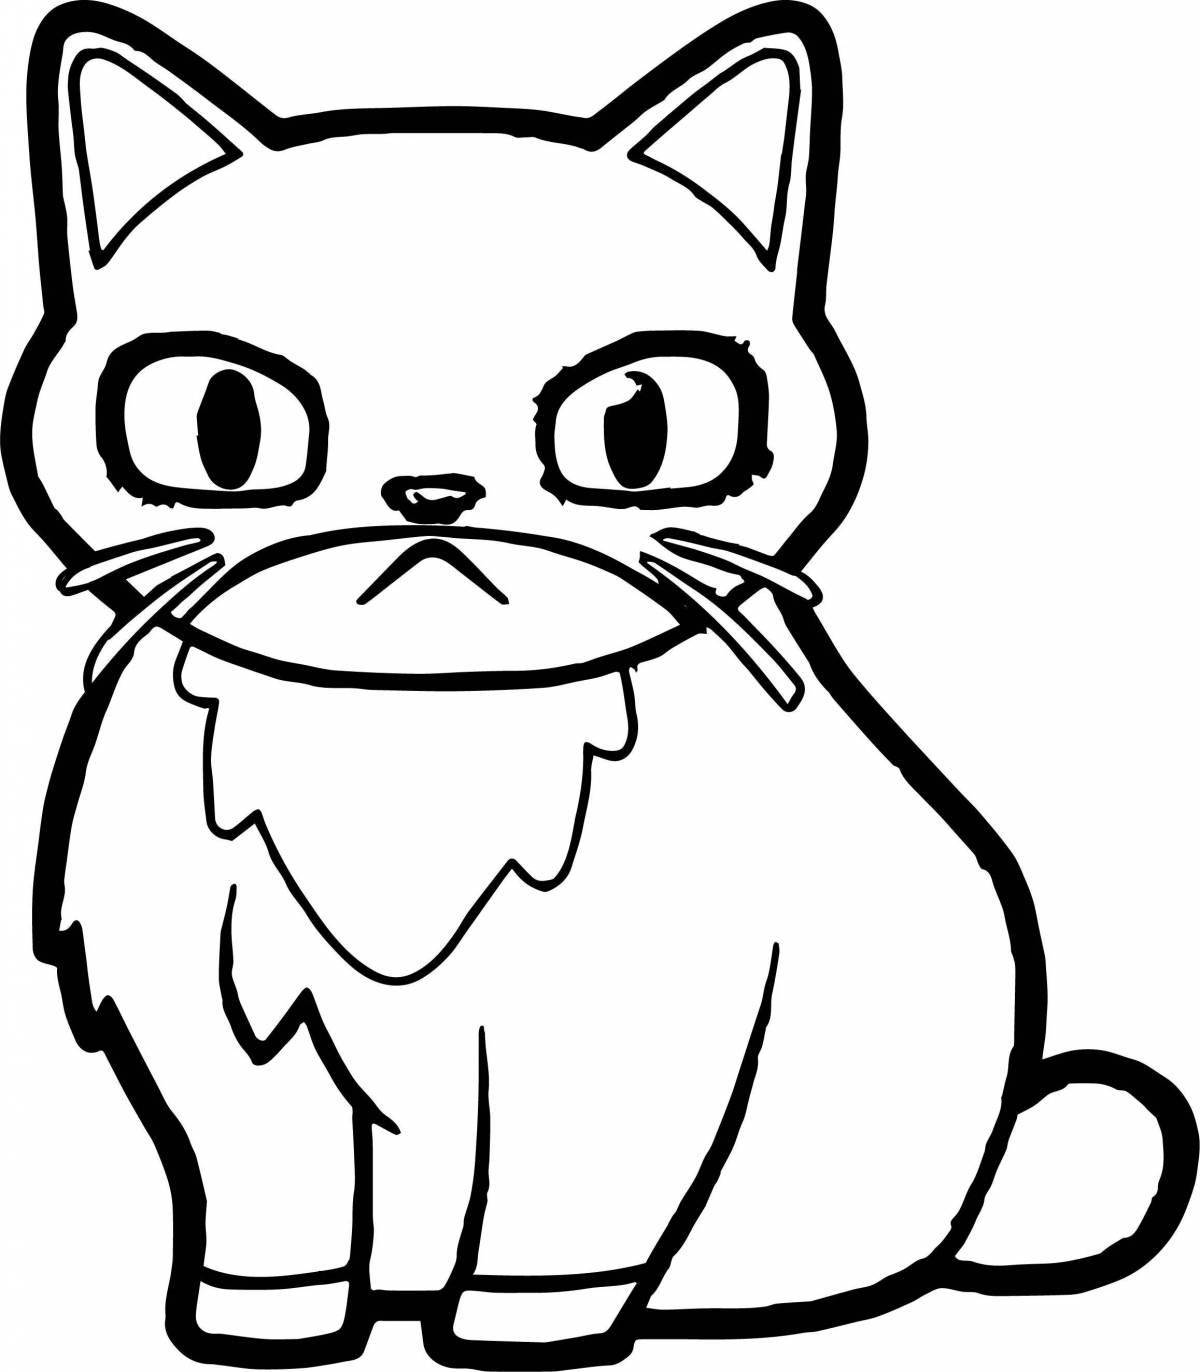 Glittering cartoon cat coloring book for kids